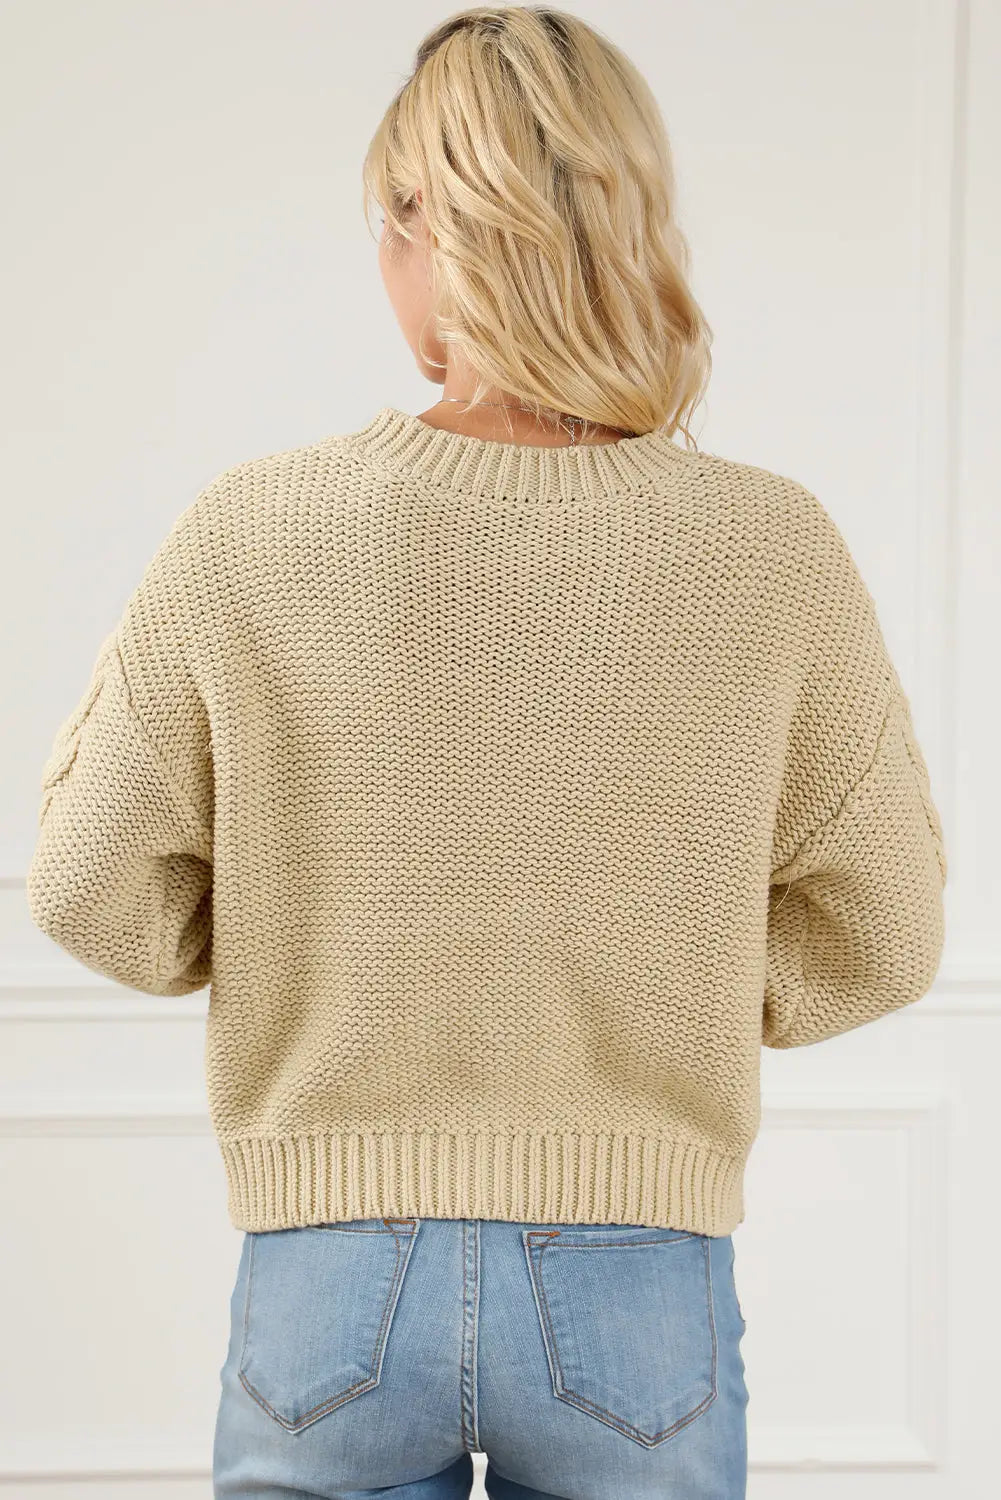 Apricot cable knit buttoned cardigan - tops